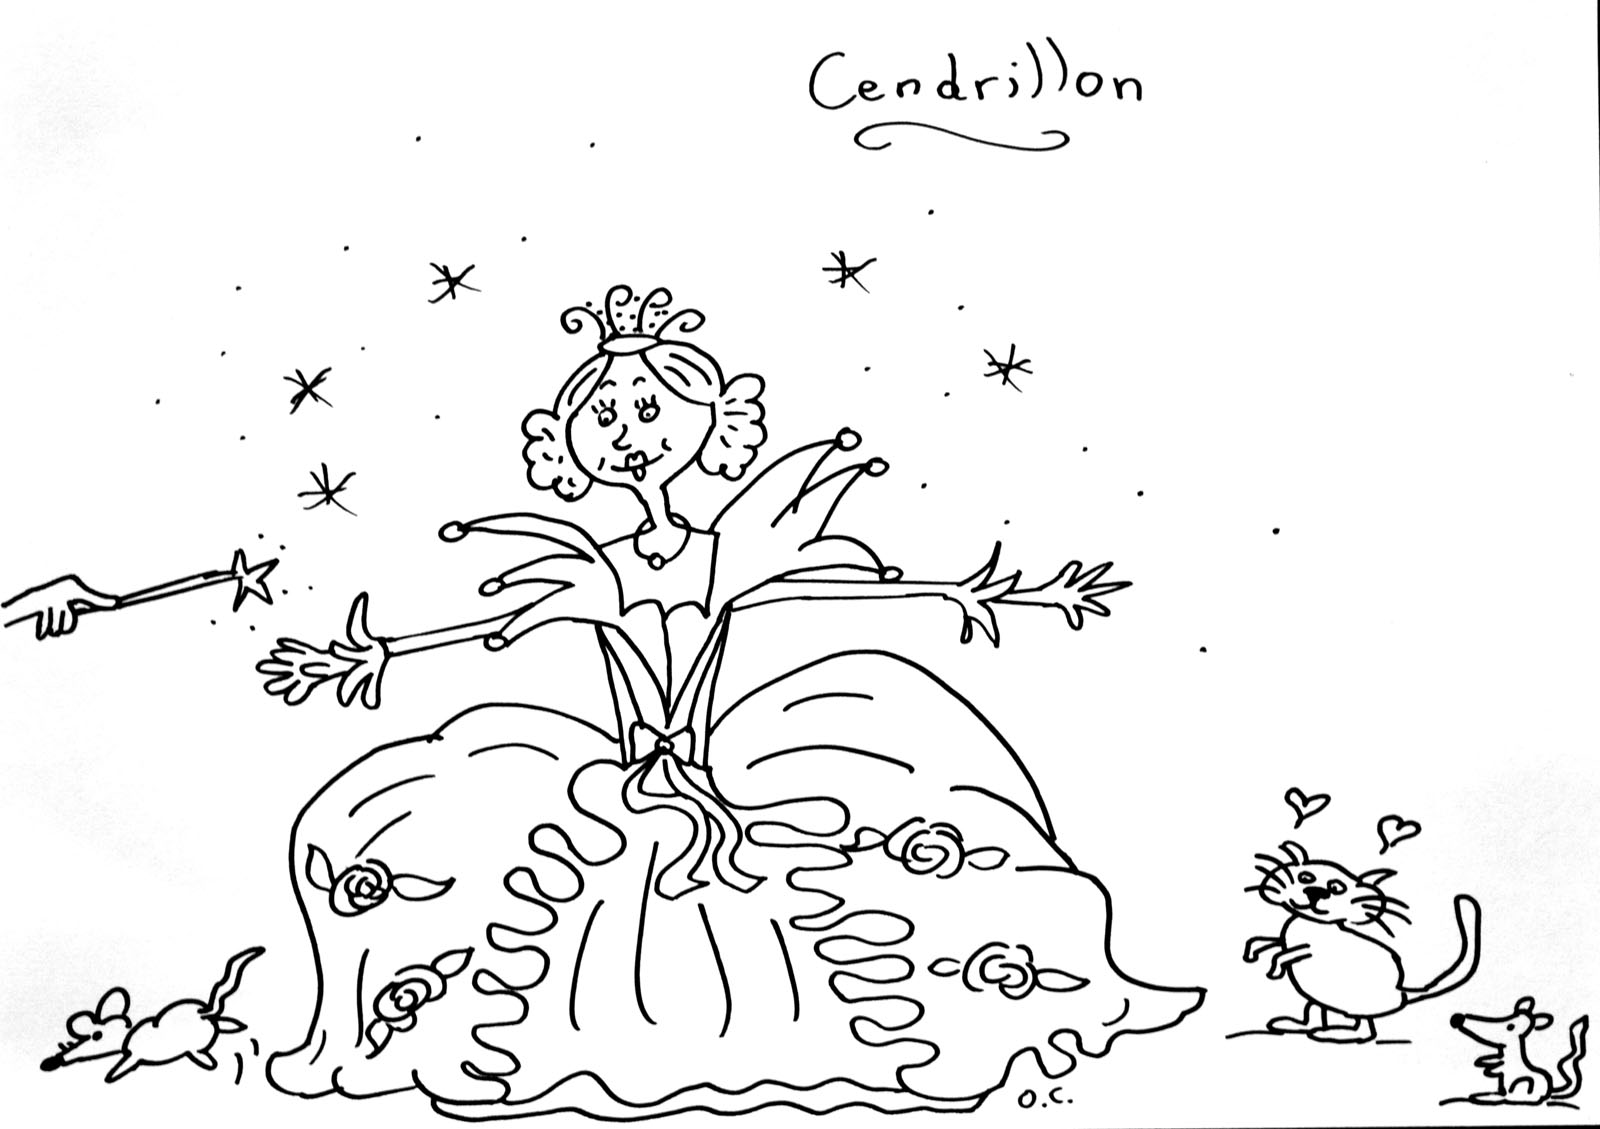 Cinderella : Exclusive coloring page for kids !